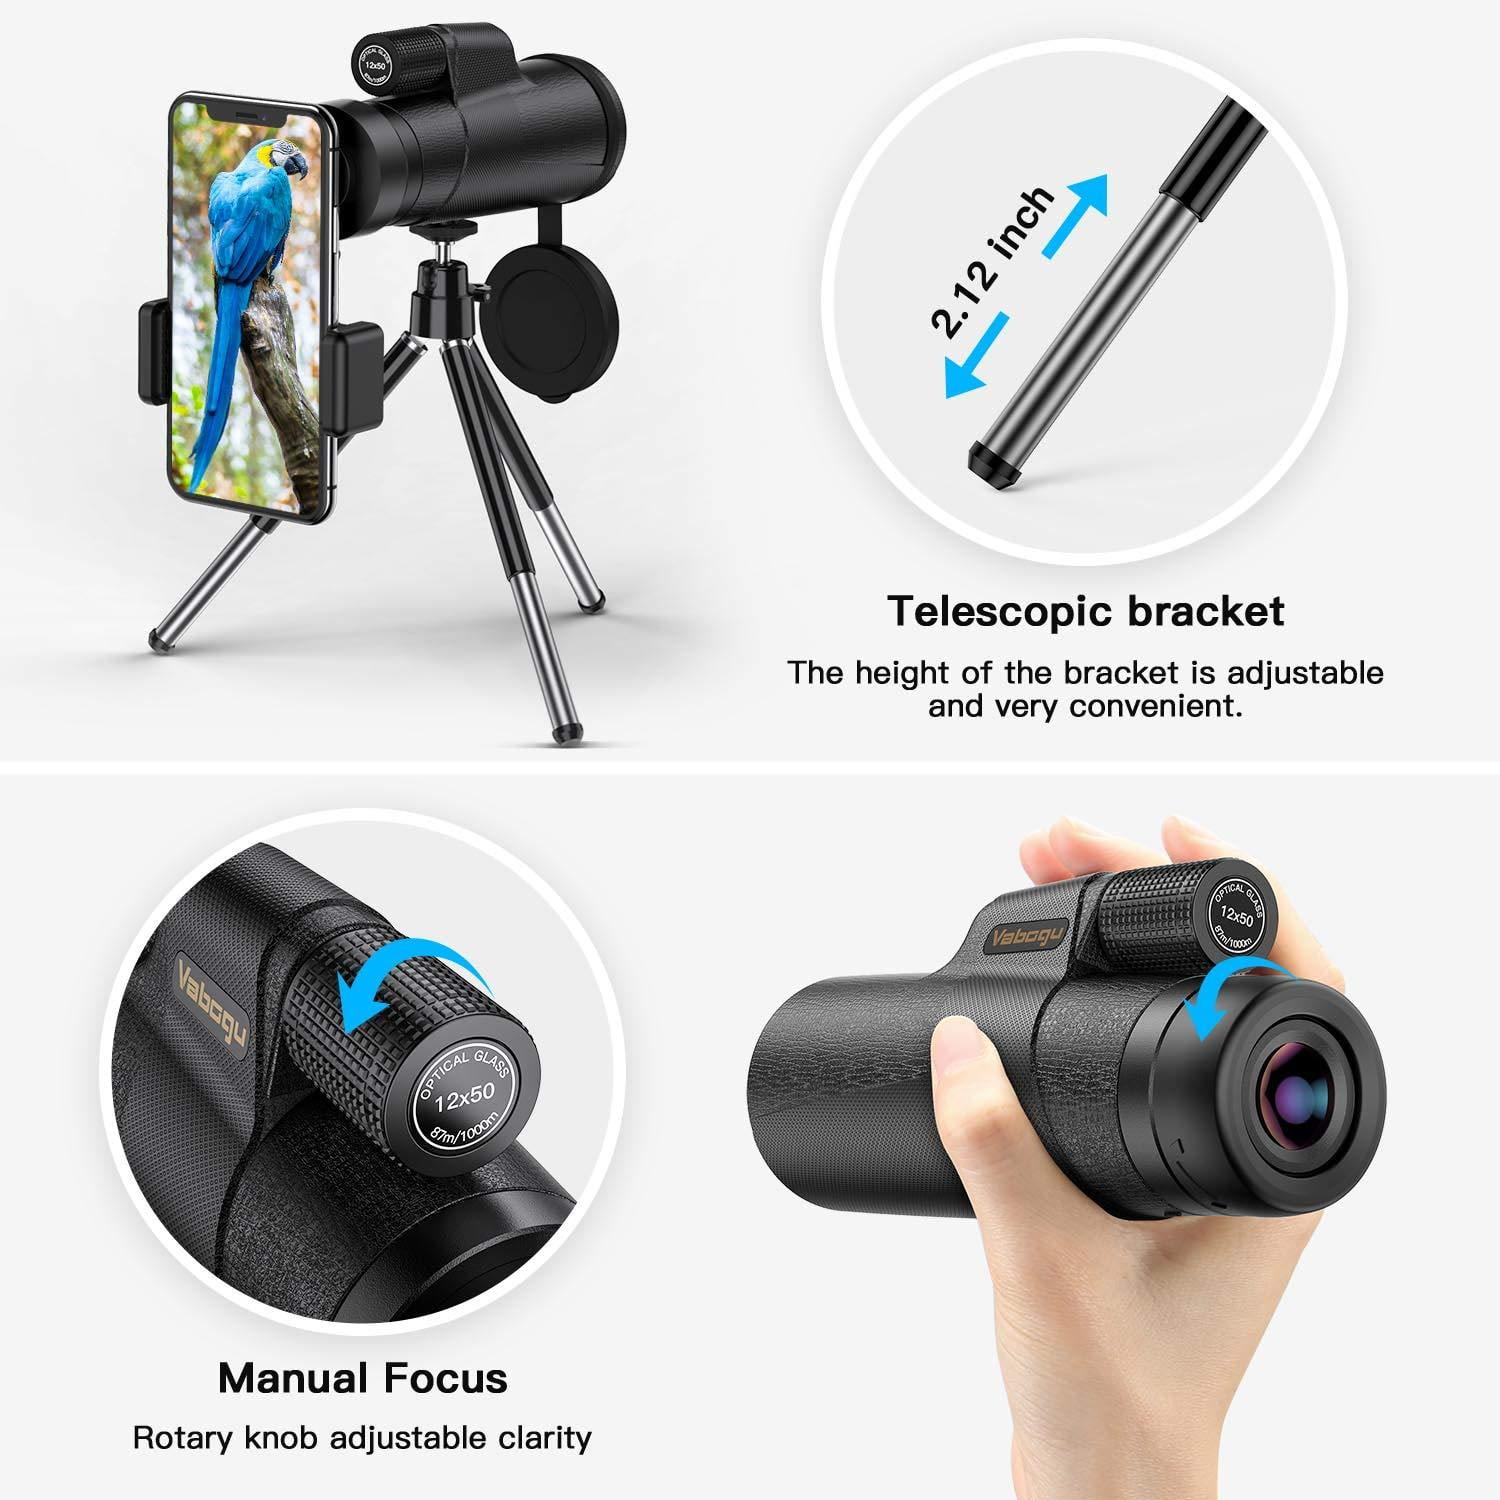 12x50 High Power HD Compact Monocular with Smartphone Holder & Phone Tripod for Adults Kids Night Vision IPX7 Waterproof FMC BAK4 Prism Scope for Bird Watching Monocular Telescope